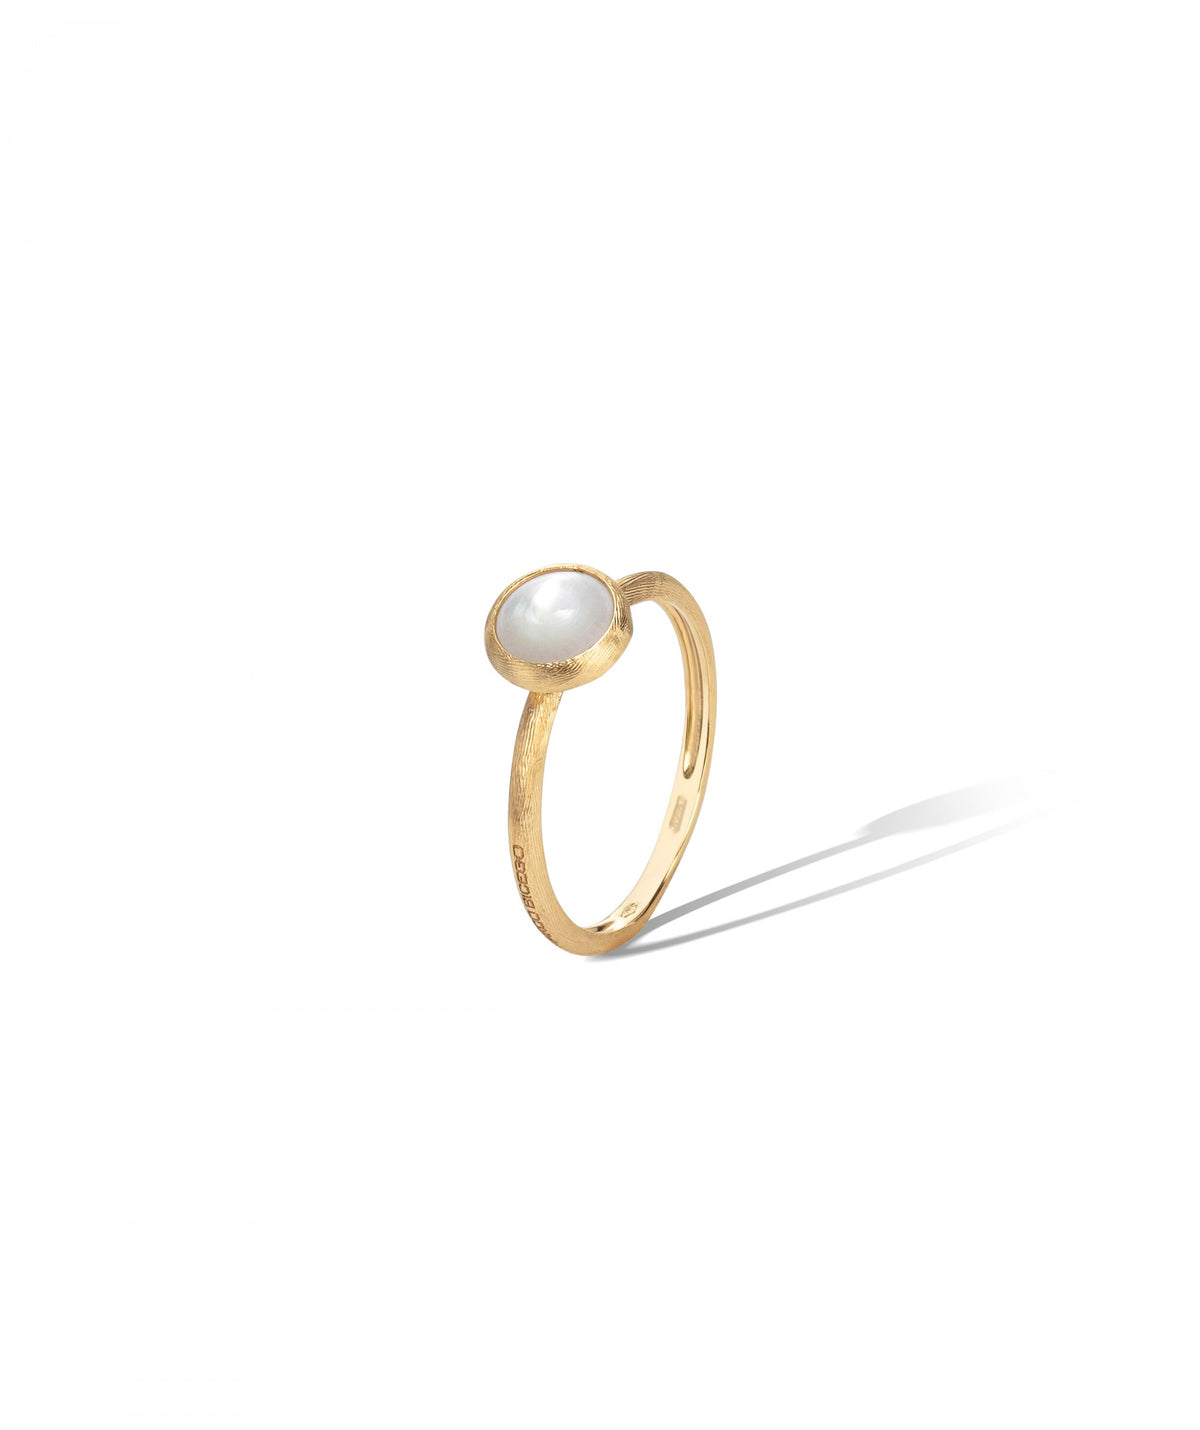 Jaipur Colour Ring in 18k Yellow Gold with Mother of Pearl Mini - Orsini Jewellers NZ